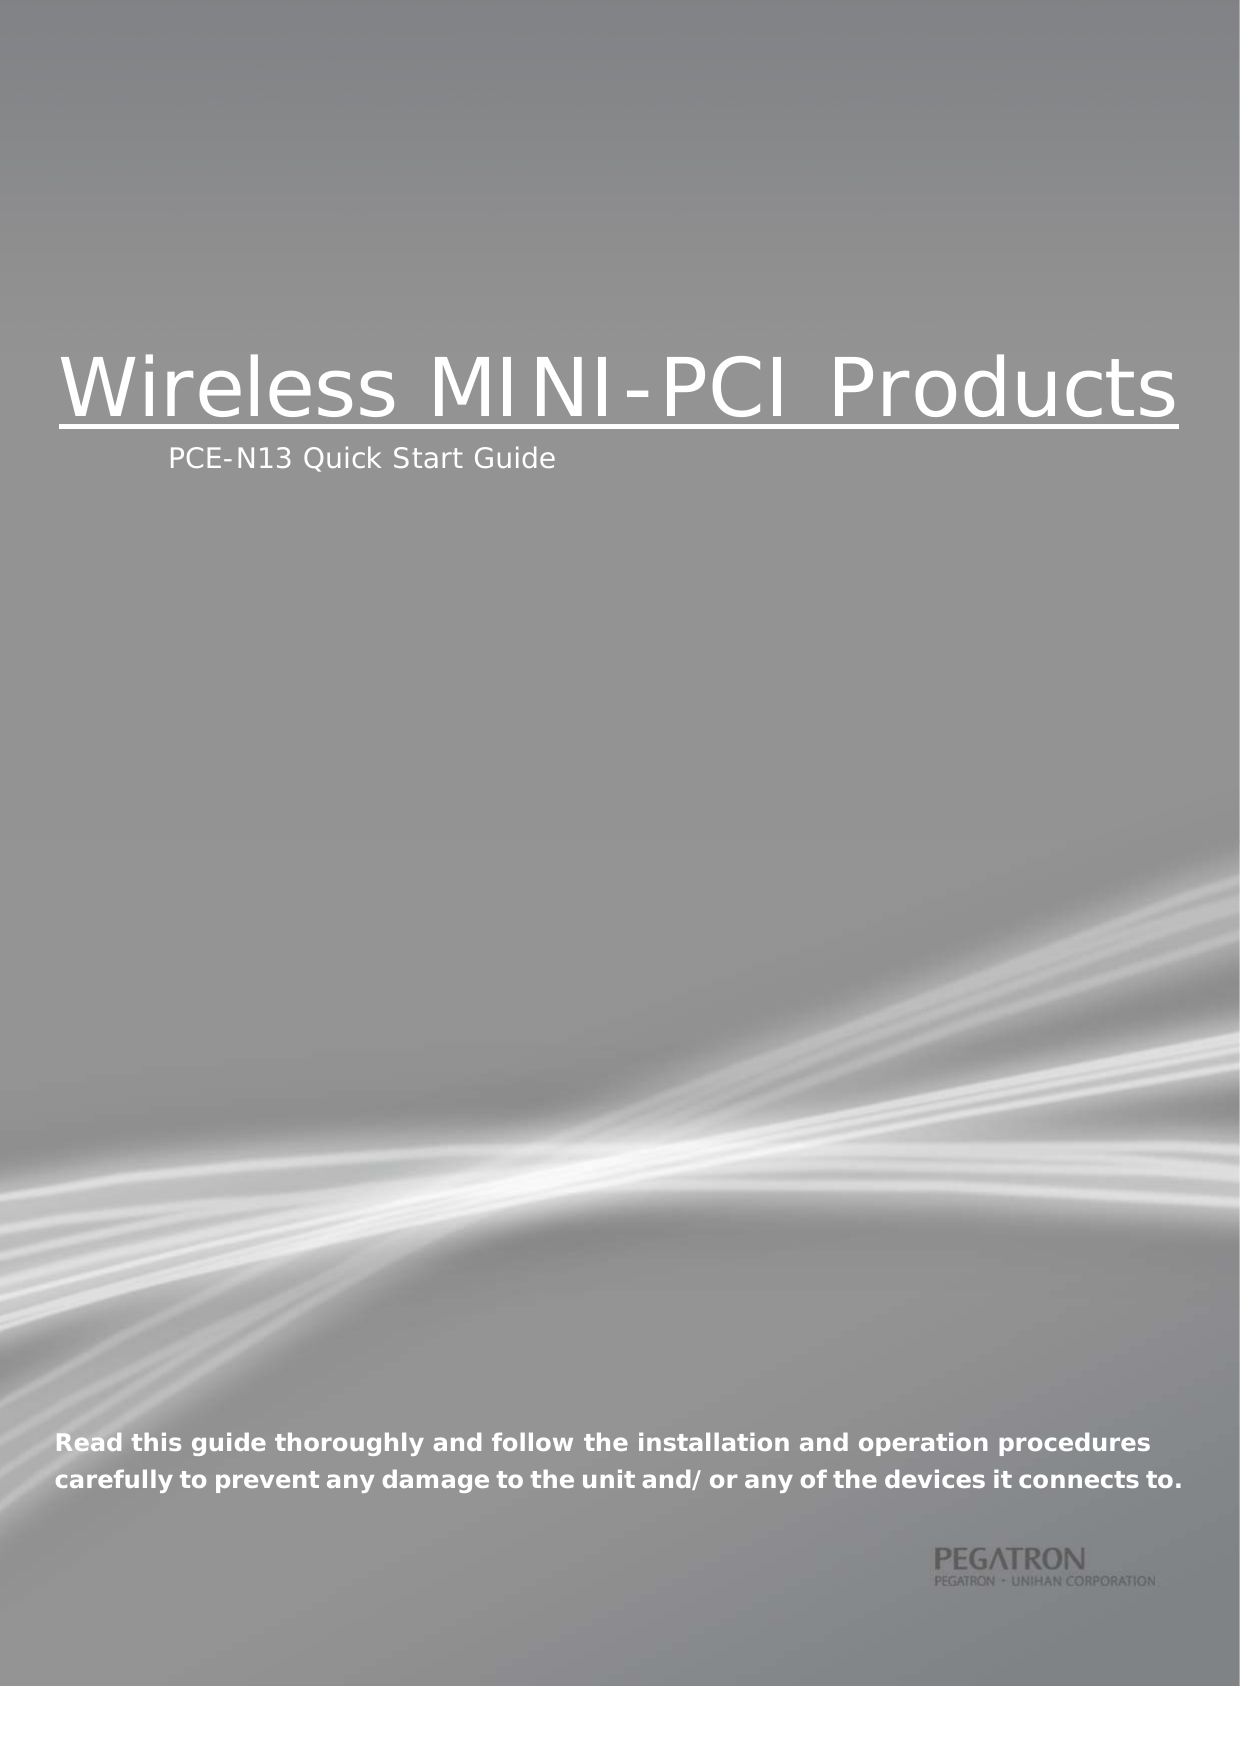  1 Wireless MINI-PCI Products PCE-N13 Quick Start Guide                           Read this guide thoroughly and follow the installation and operation procedures carefully to prevent any damage to the unit and/or any of the devices it connects to.  